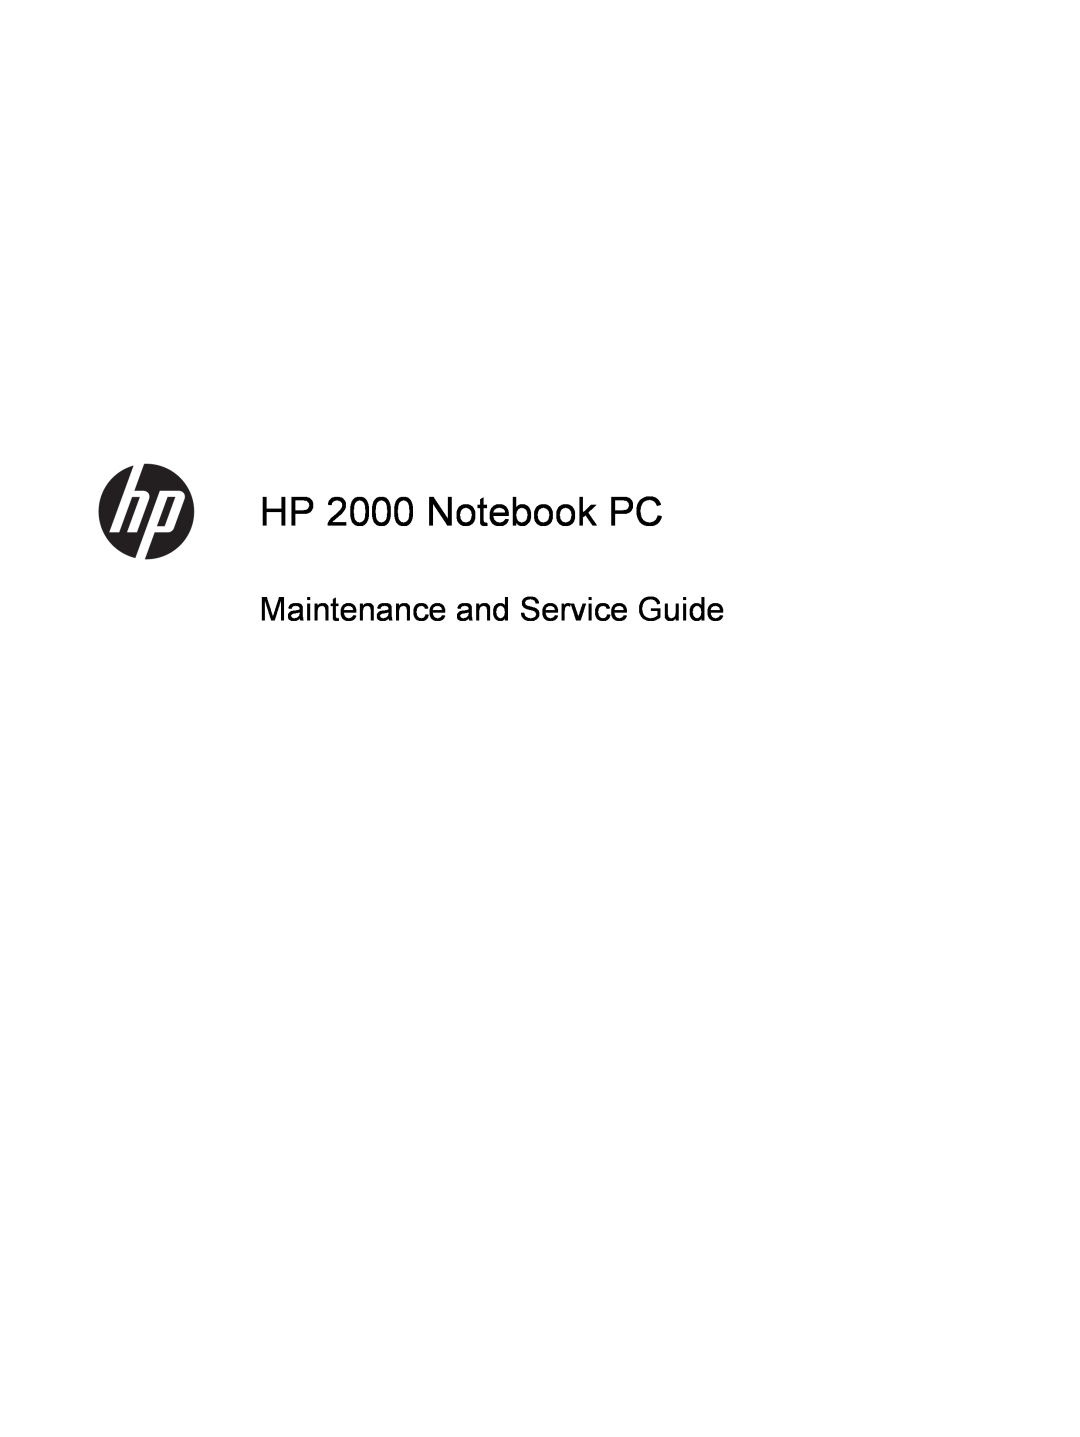 HP 2000 Base Model manual Hardware Reference Guide, HP RP2 Retail System 